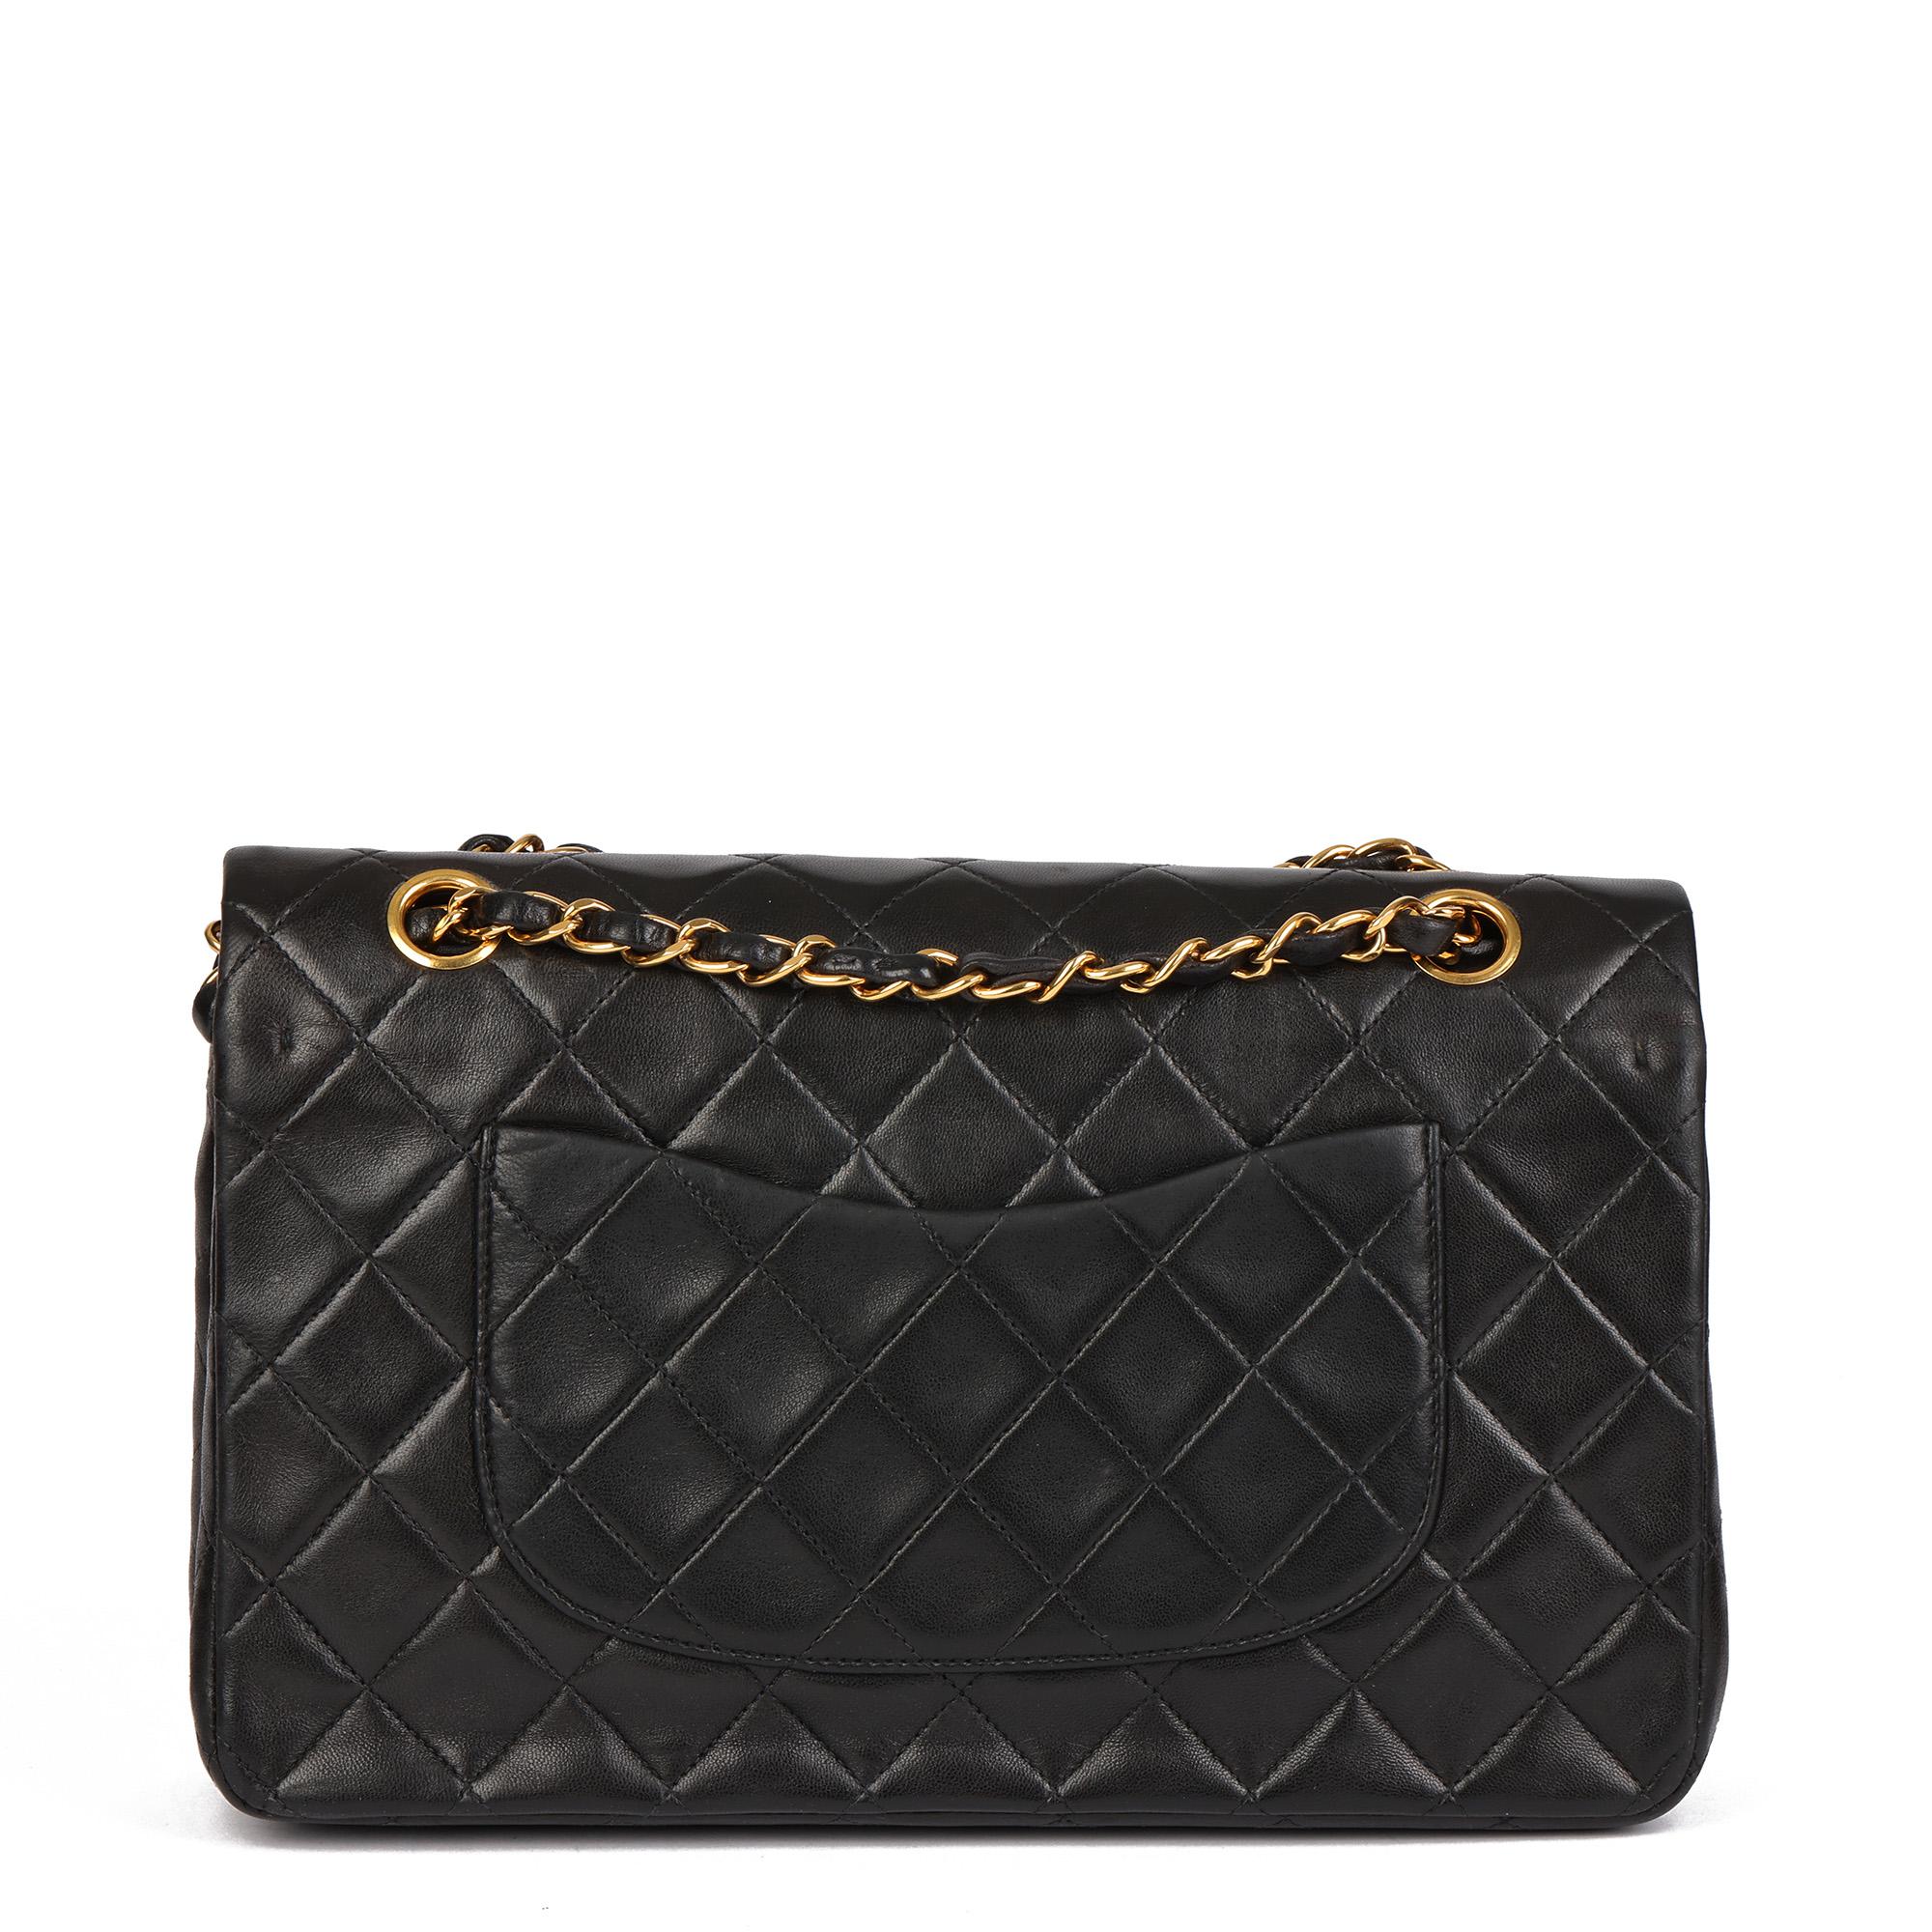 Women's Chanel BLACK QUILTED LAMBSKIN VINTAGE MEDIUM CLASSIC DOUBLE FLAP BAG